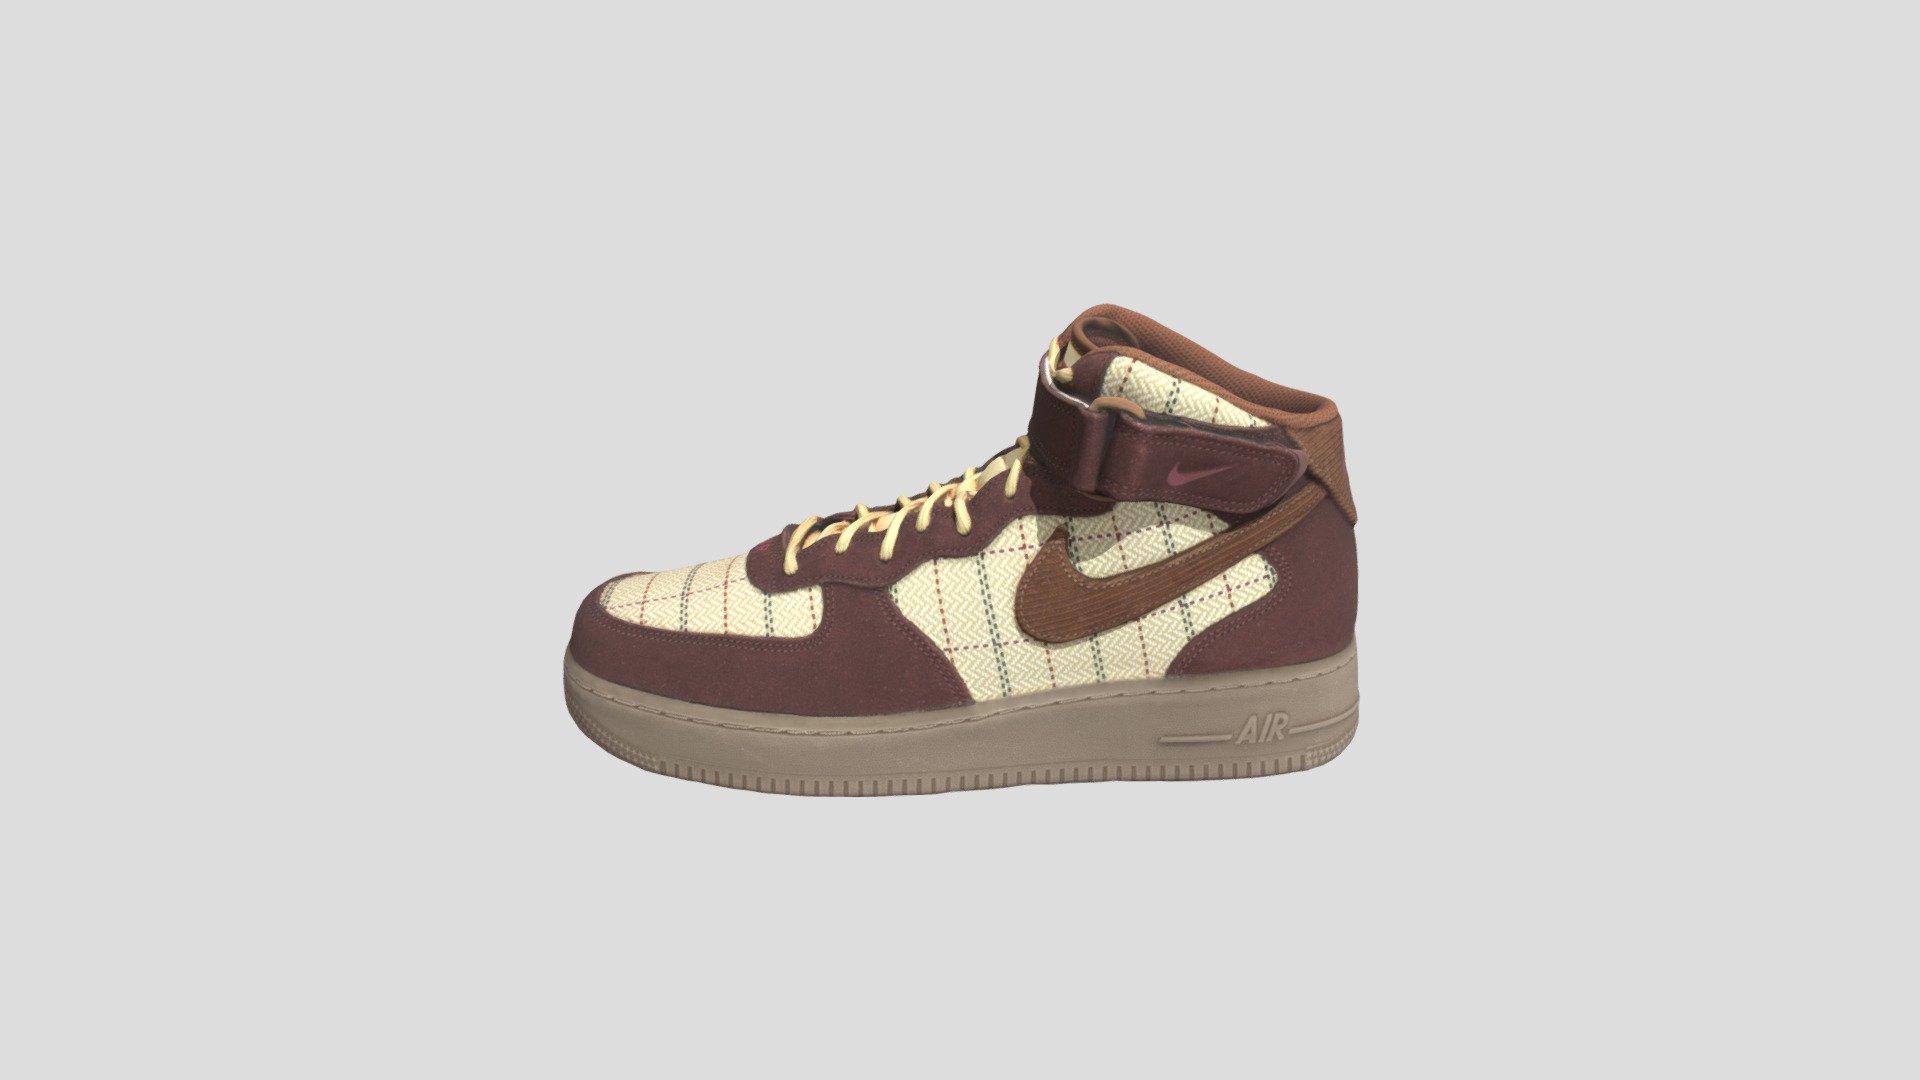 This model was created firstly by 3D scanning on retail version, and then being detail-improved manually, thus a 1:1 repulica of the original
PBR ready
Low-poly
4K texture
Welcome to check out other models we have to offer. And we do accept custom orders as well :) - Nike Air Force 1 Mid '07 LV8 棕大衣_CT1206-900 - Buy Royalty Free 3D model by TRARGUS 3d model